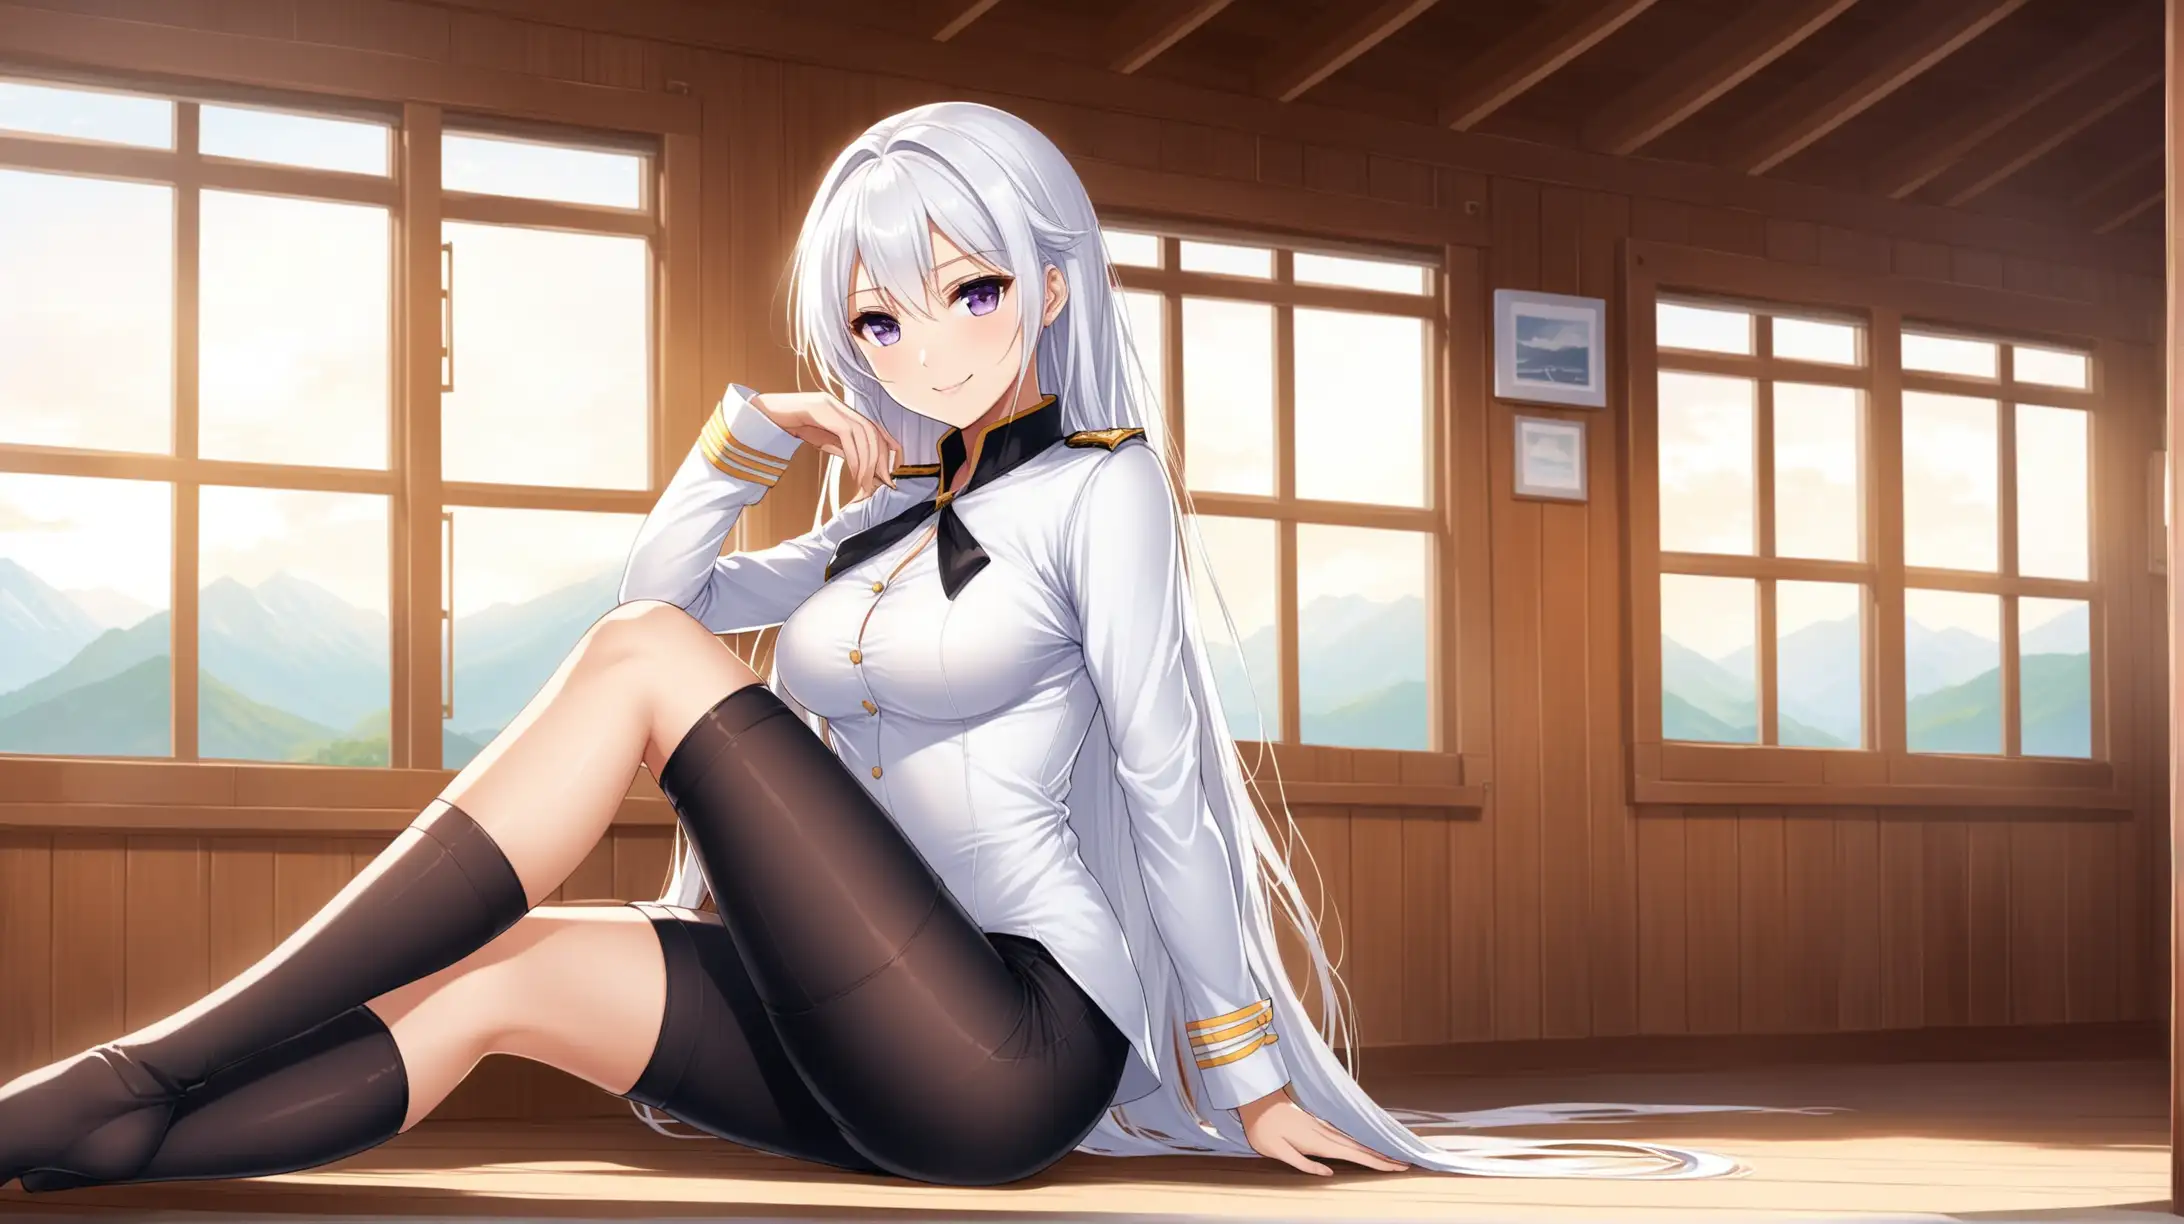 Draw the character Enterprise from Azur Lane, pale violet eyes, white hair, high quality, natural lighting, long shot, indoors, cabin, seductive pose, relaxed outfit, smiling at the viewer